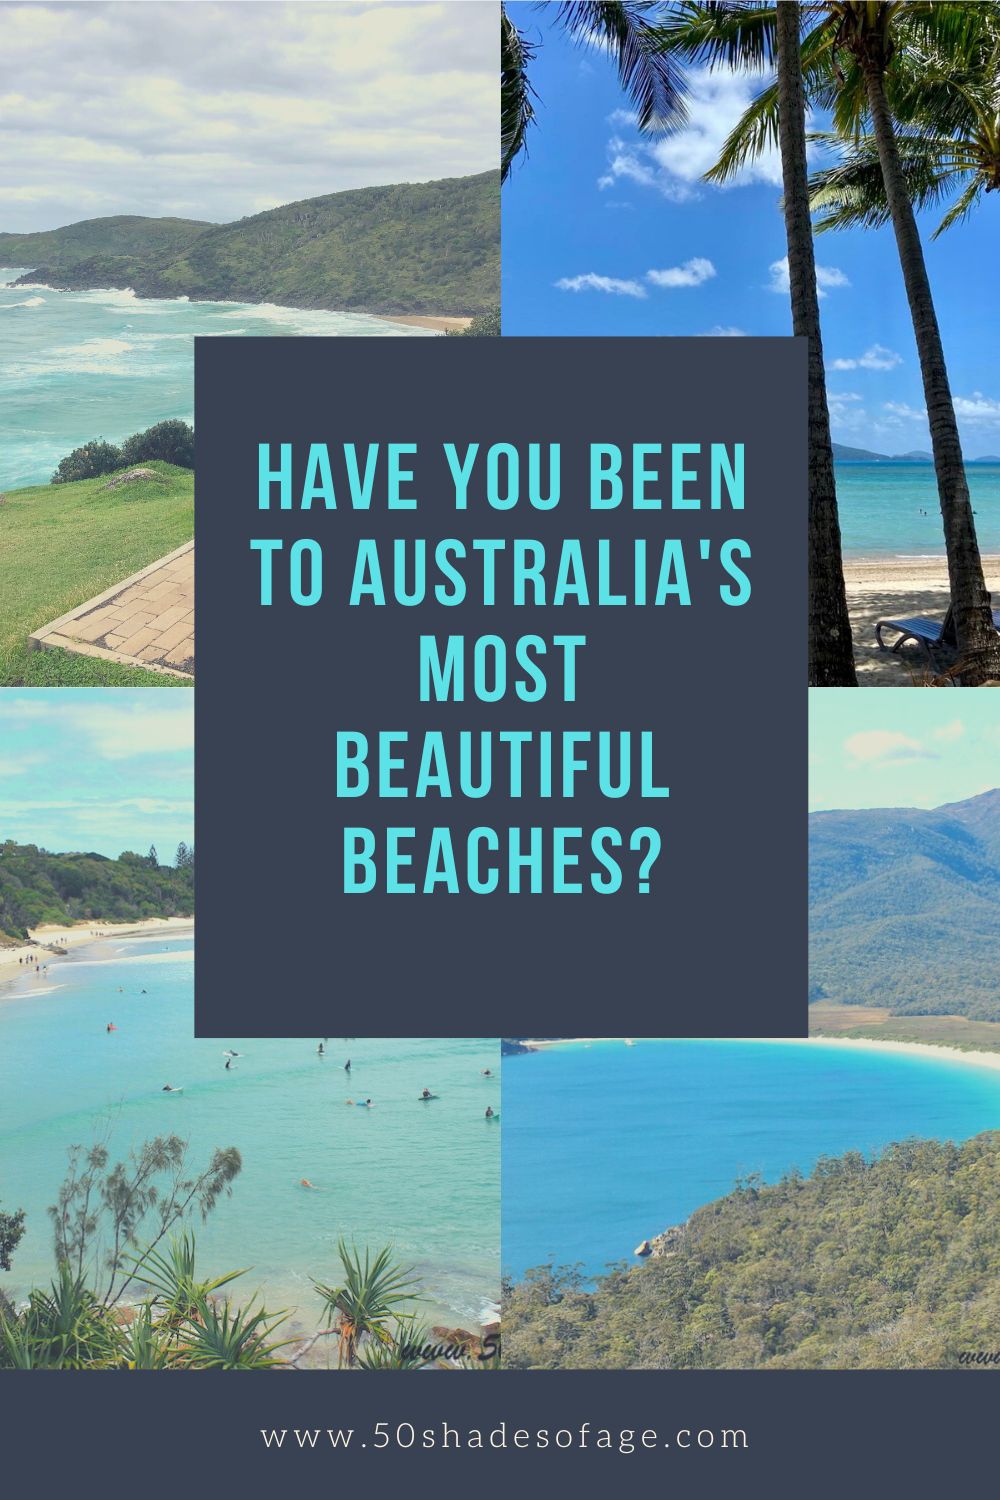 Have You Been to Australia’s Most Beautiful Beaches?